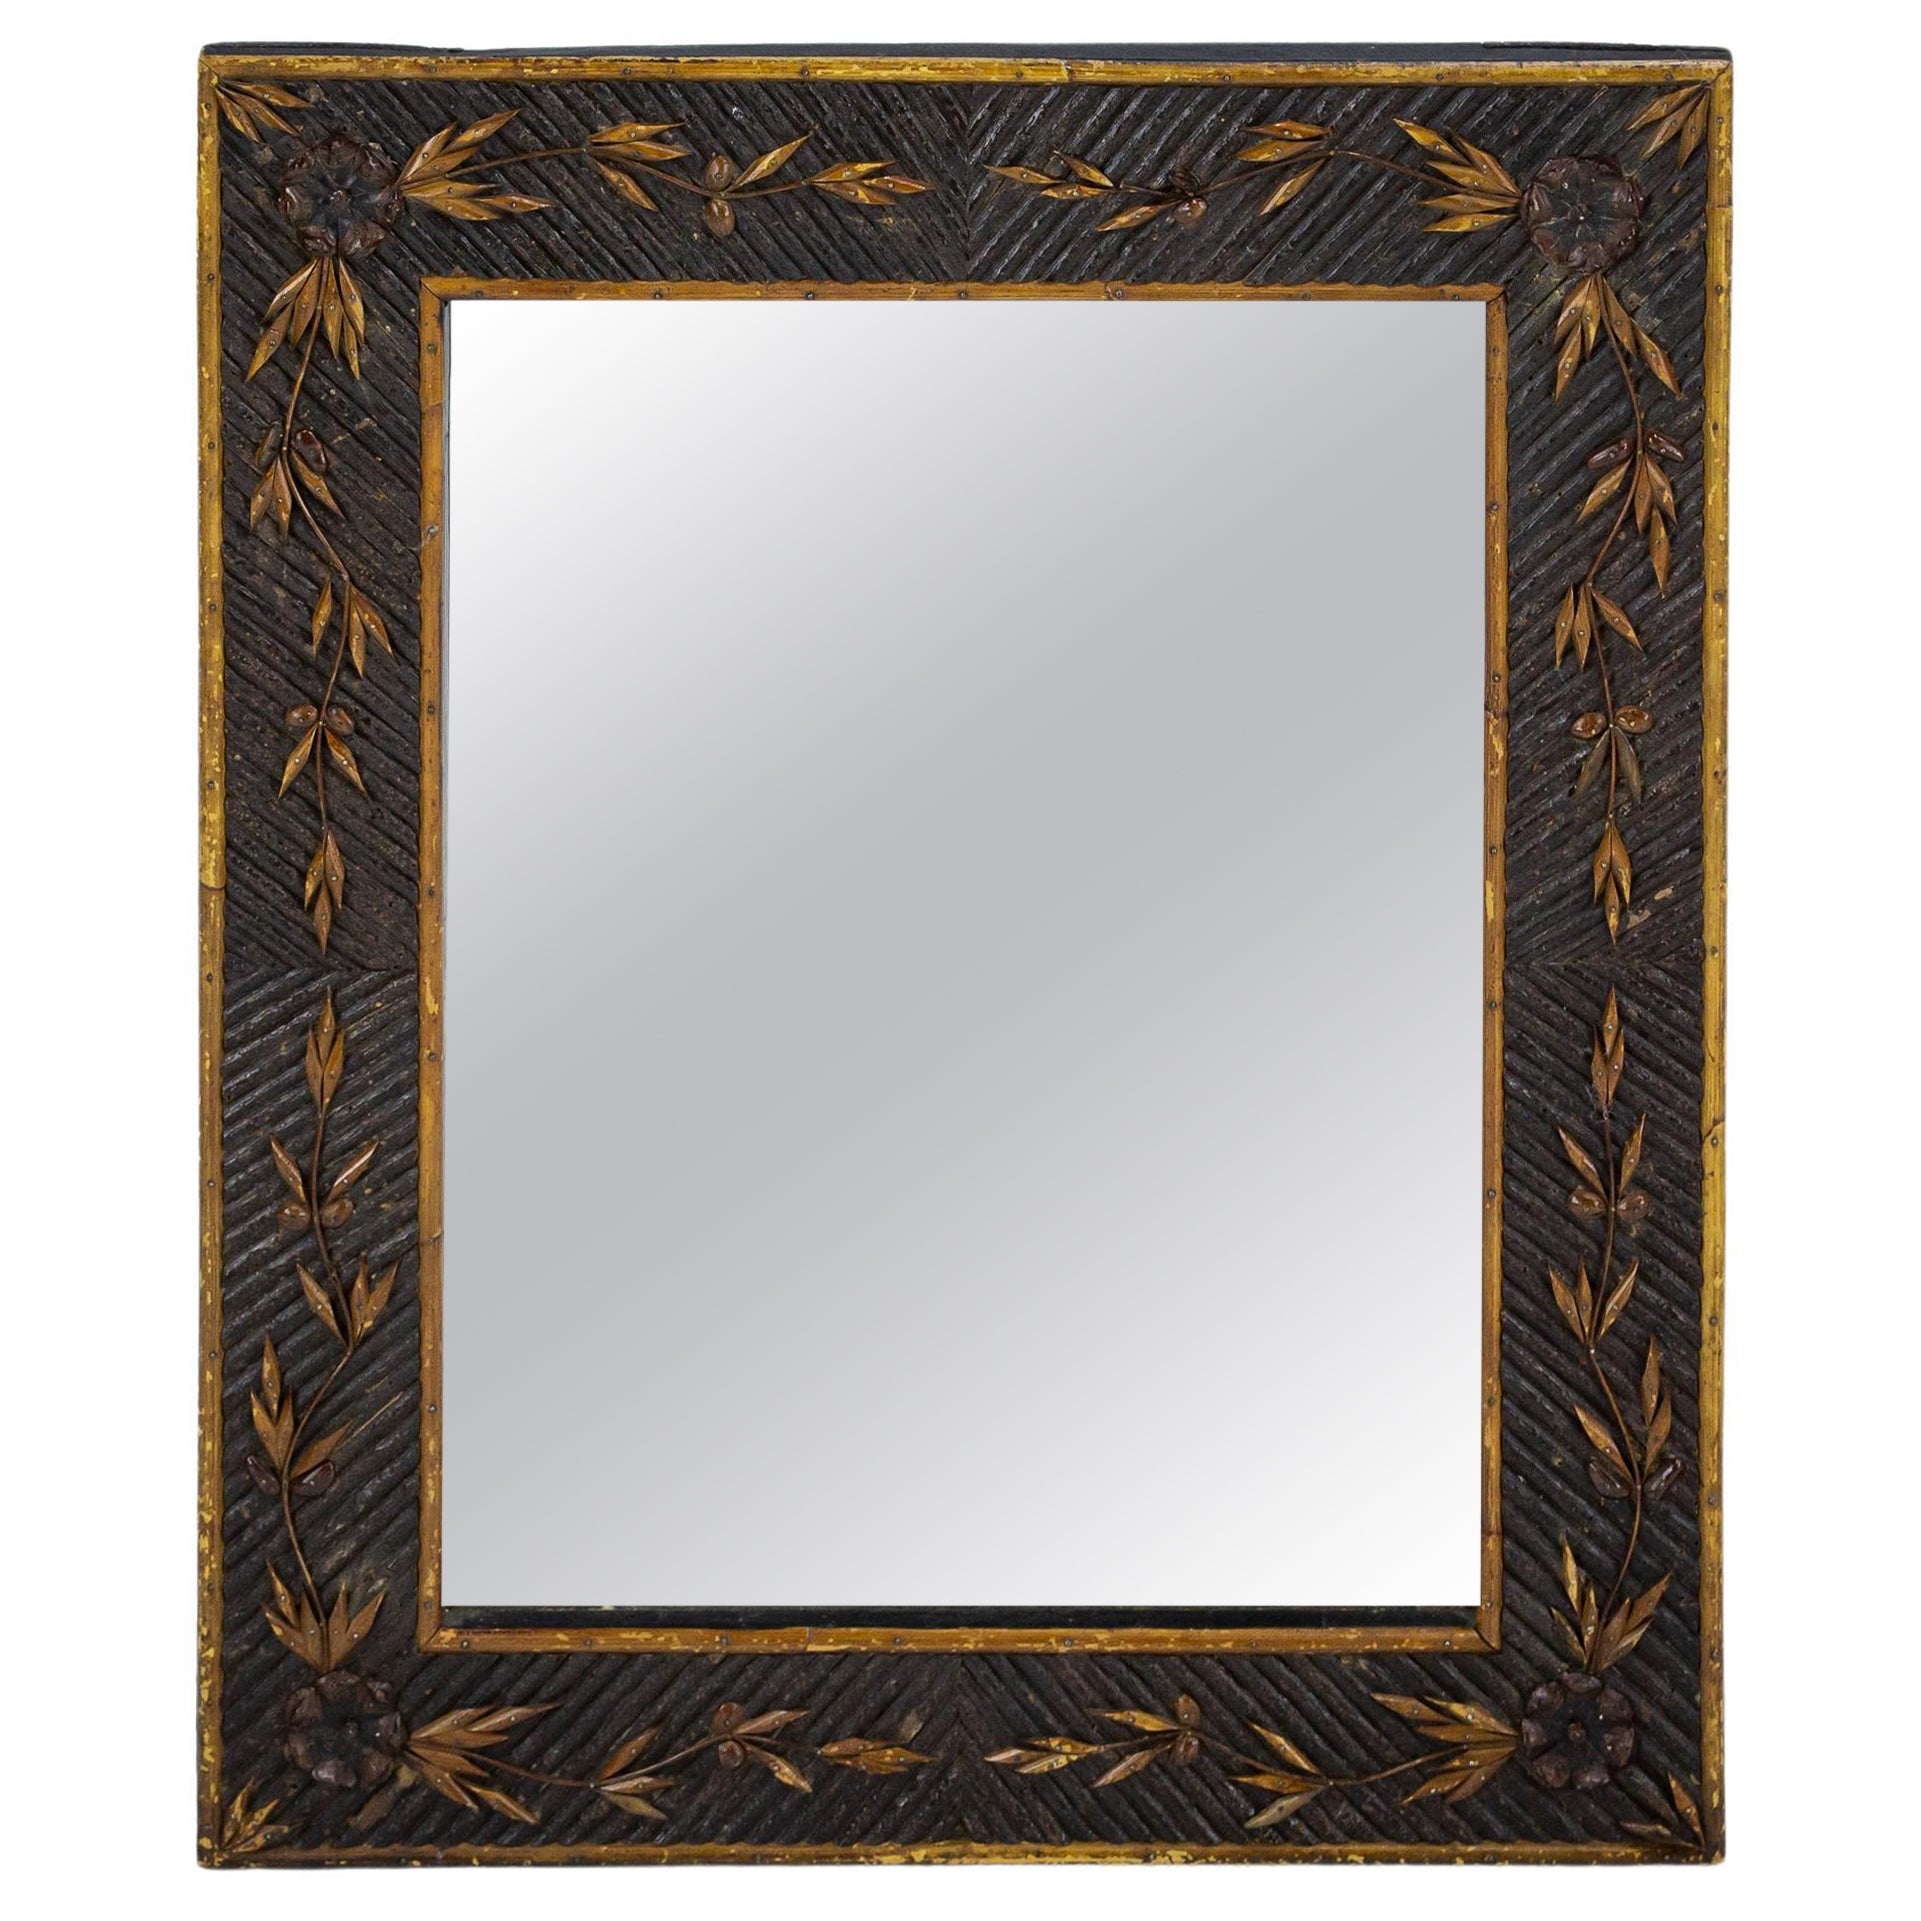 Exceptional Early 20th Century Twig Work Mirror. 